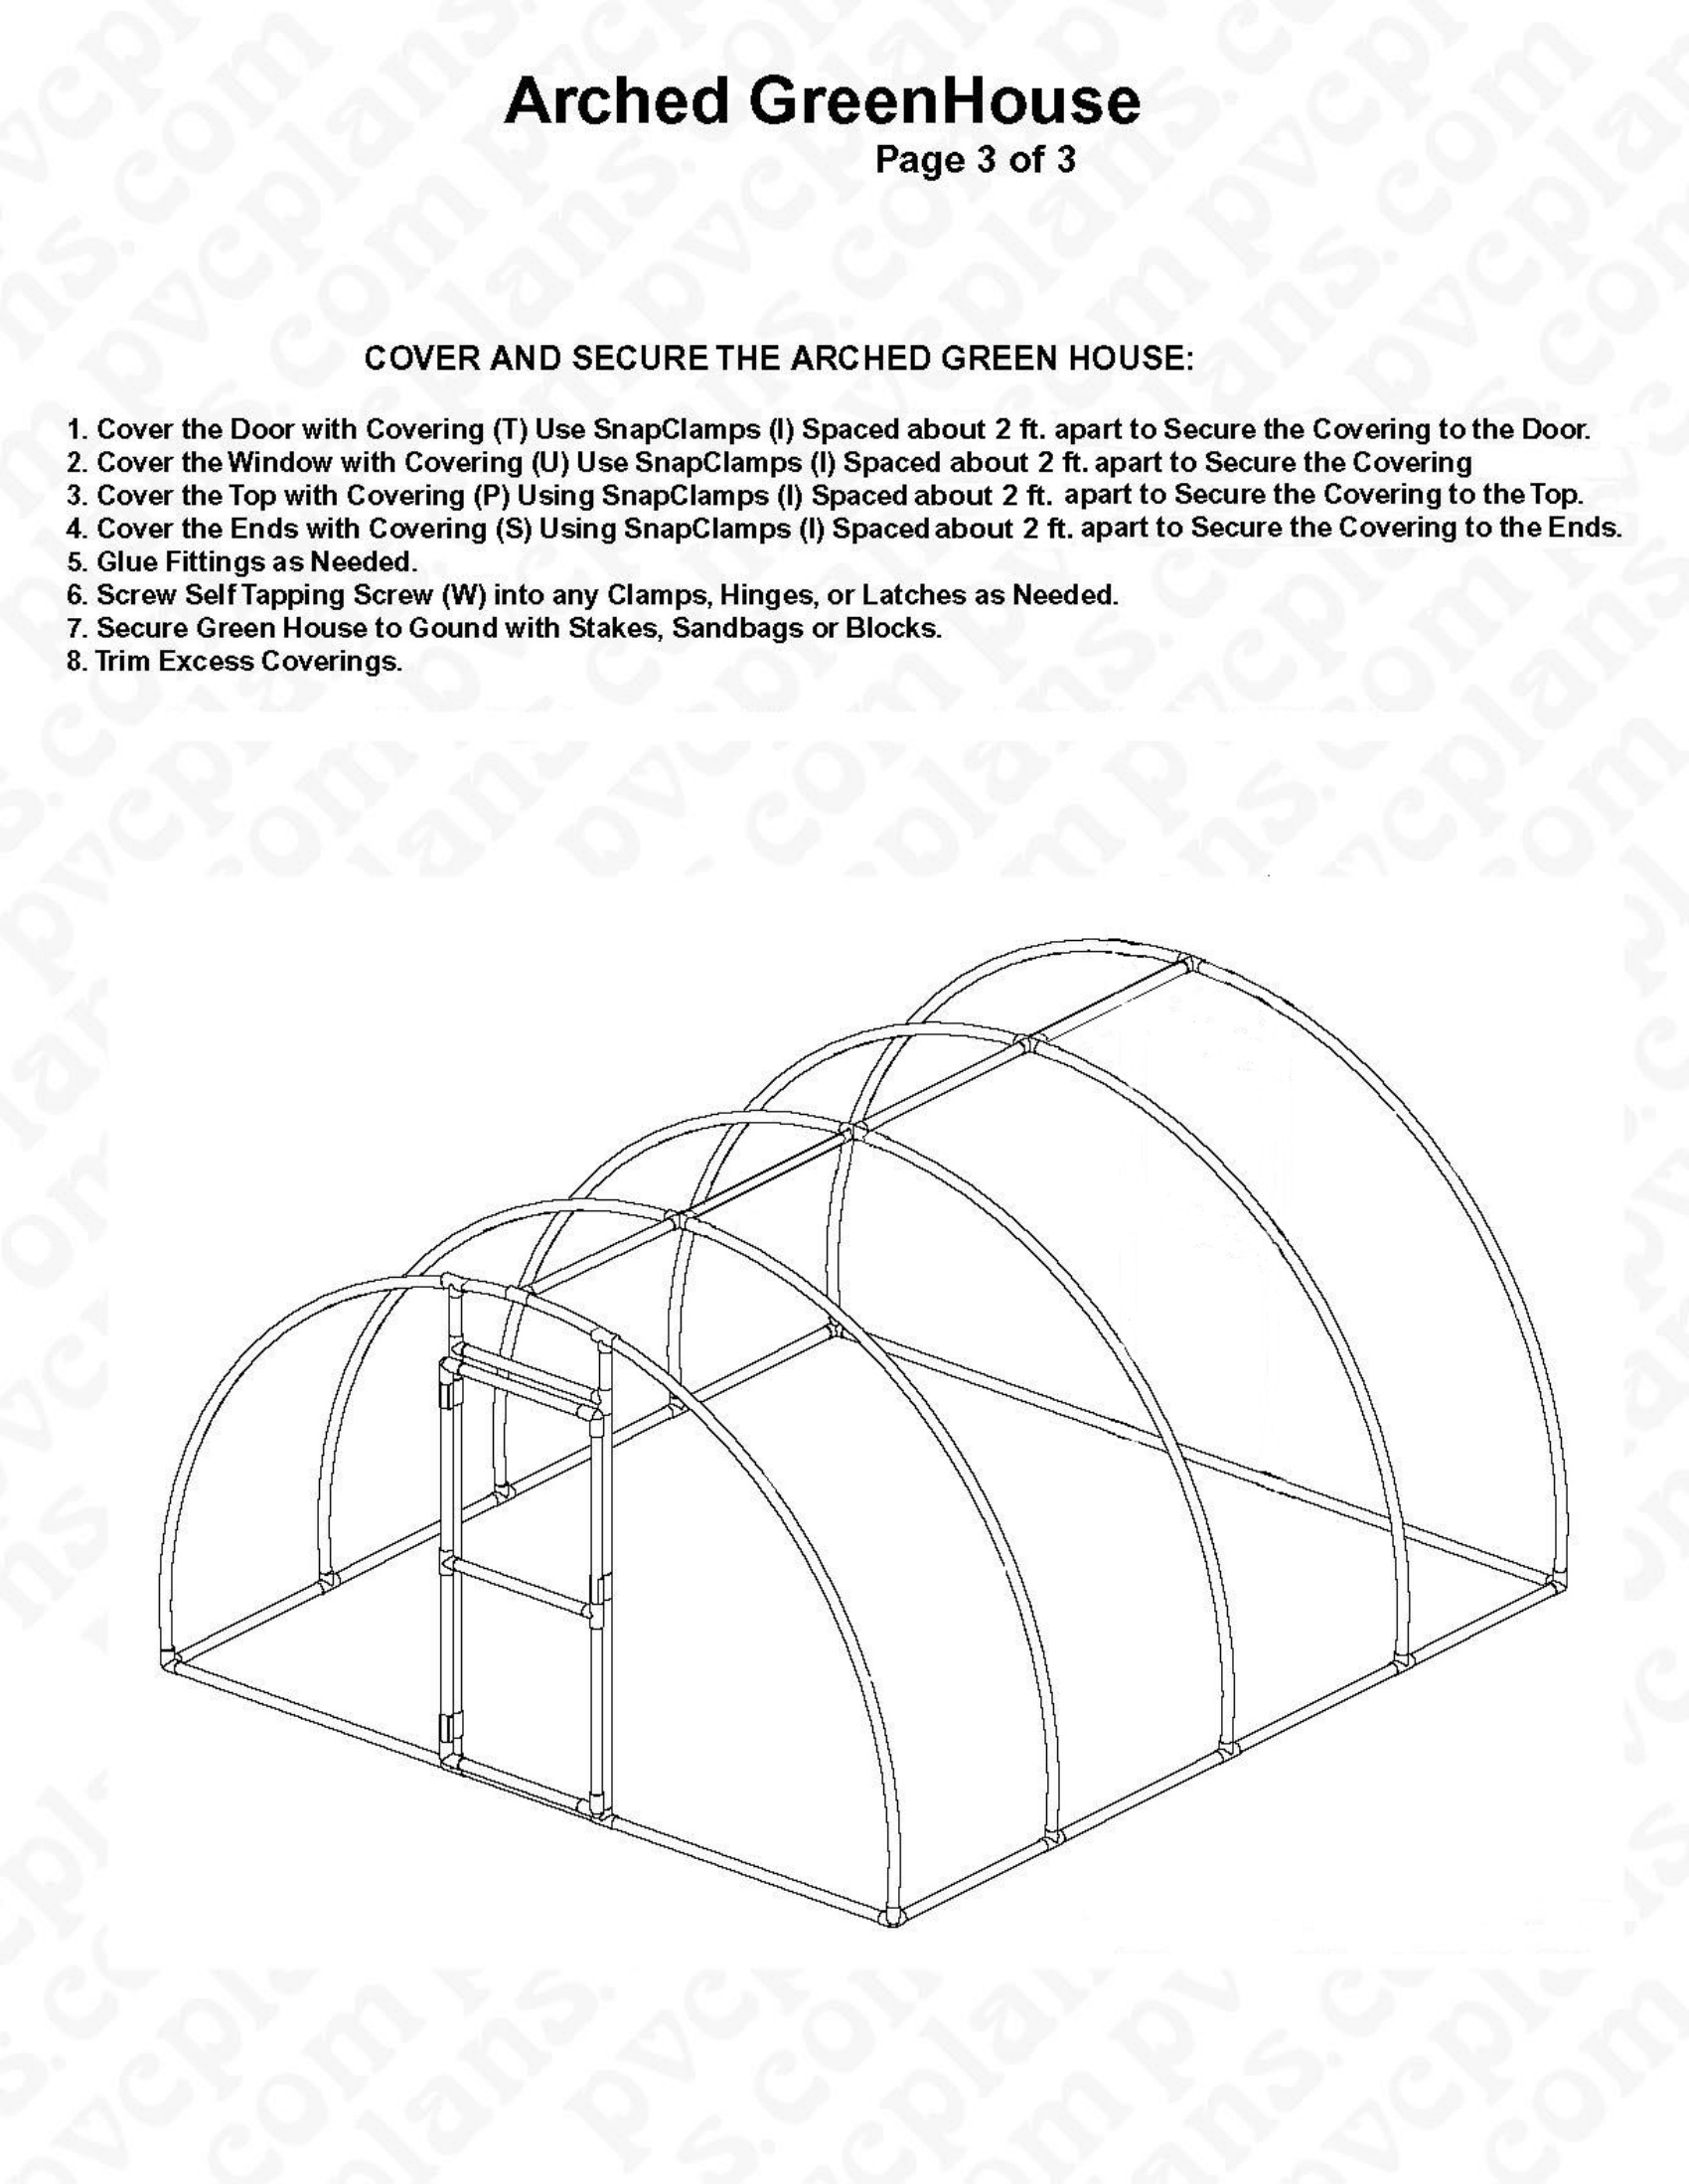 Arched Greenhouse-1 inch- Page 3